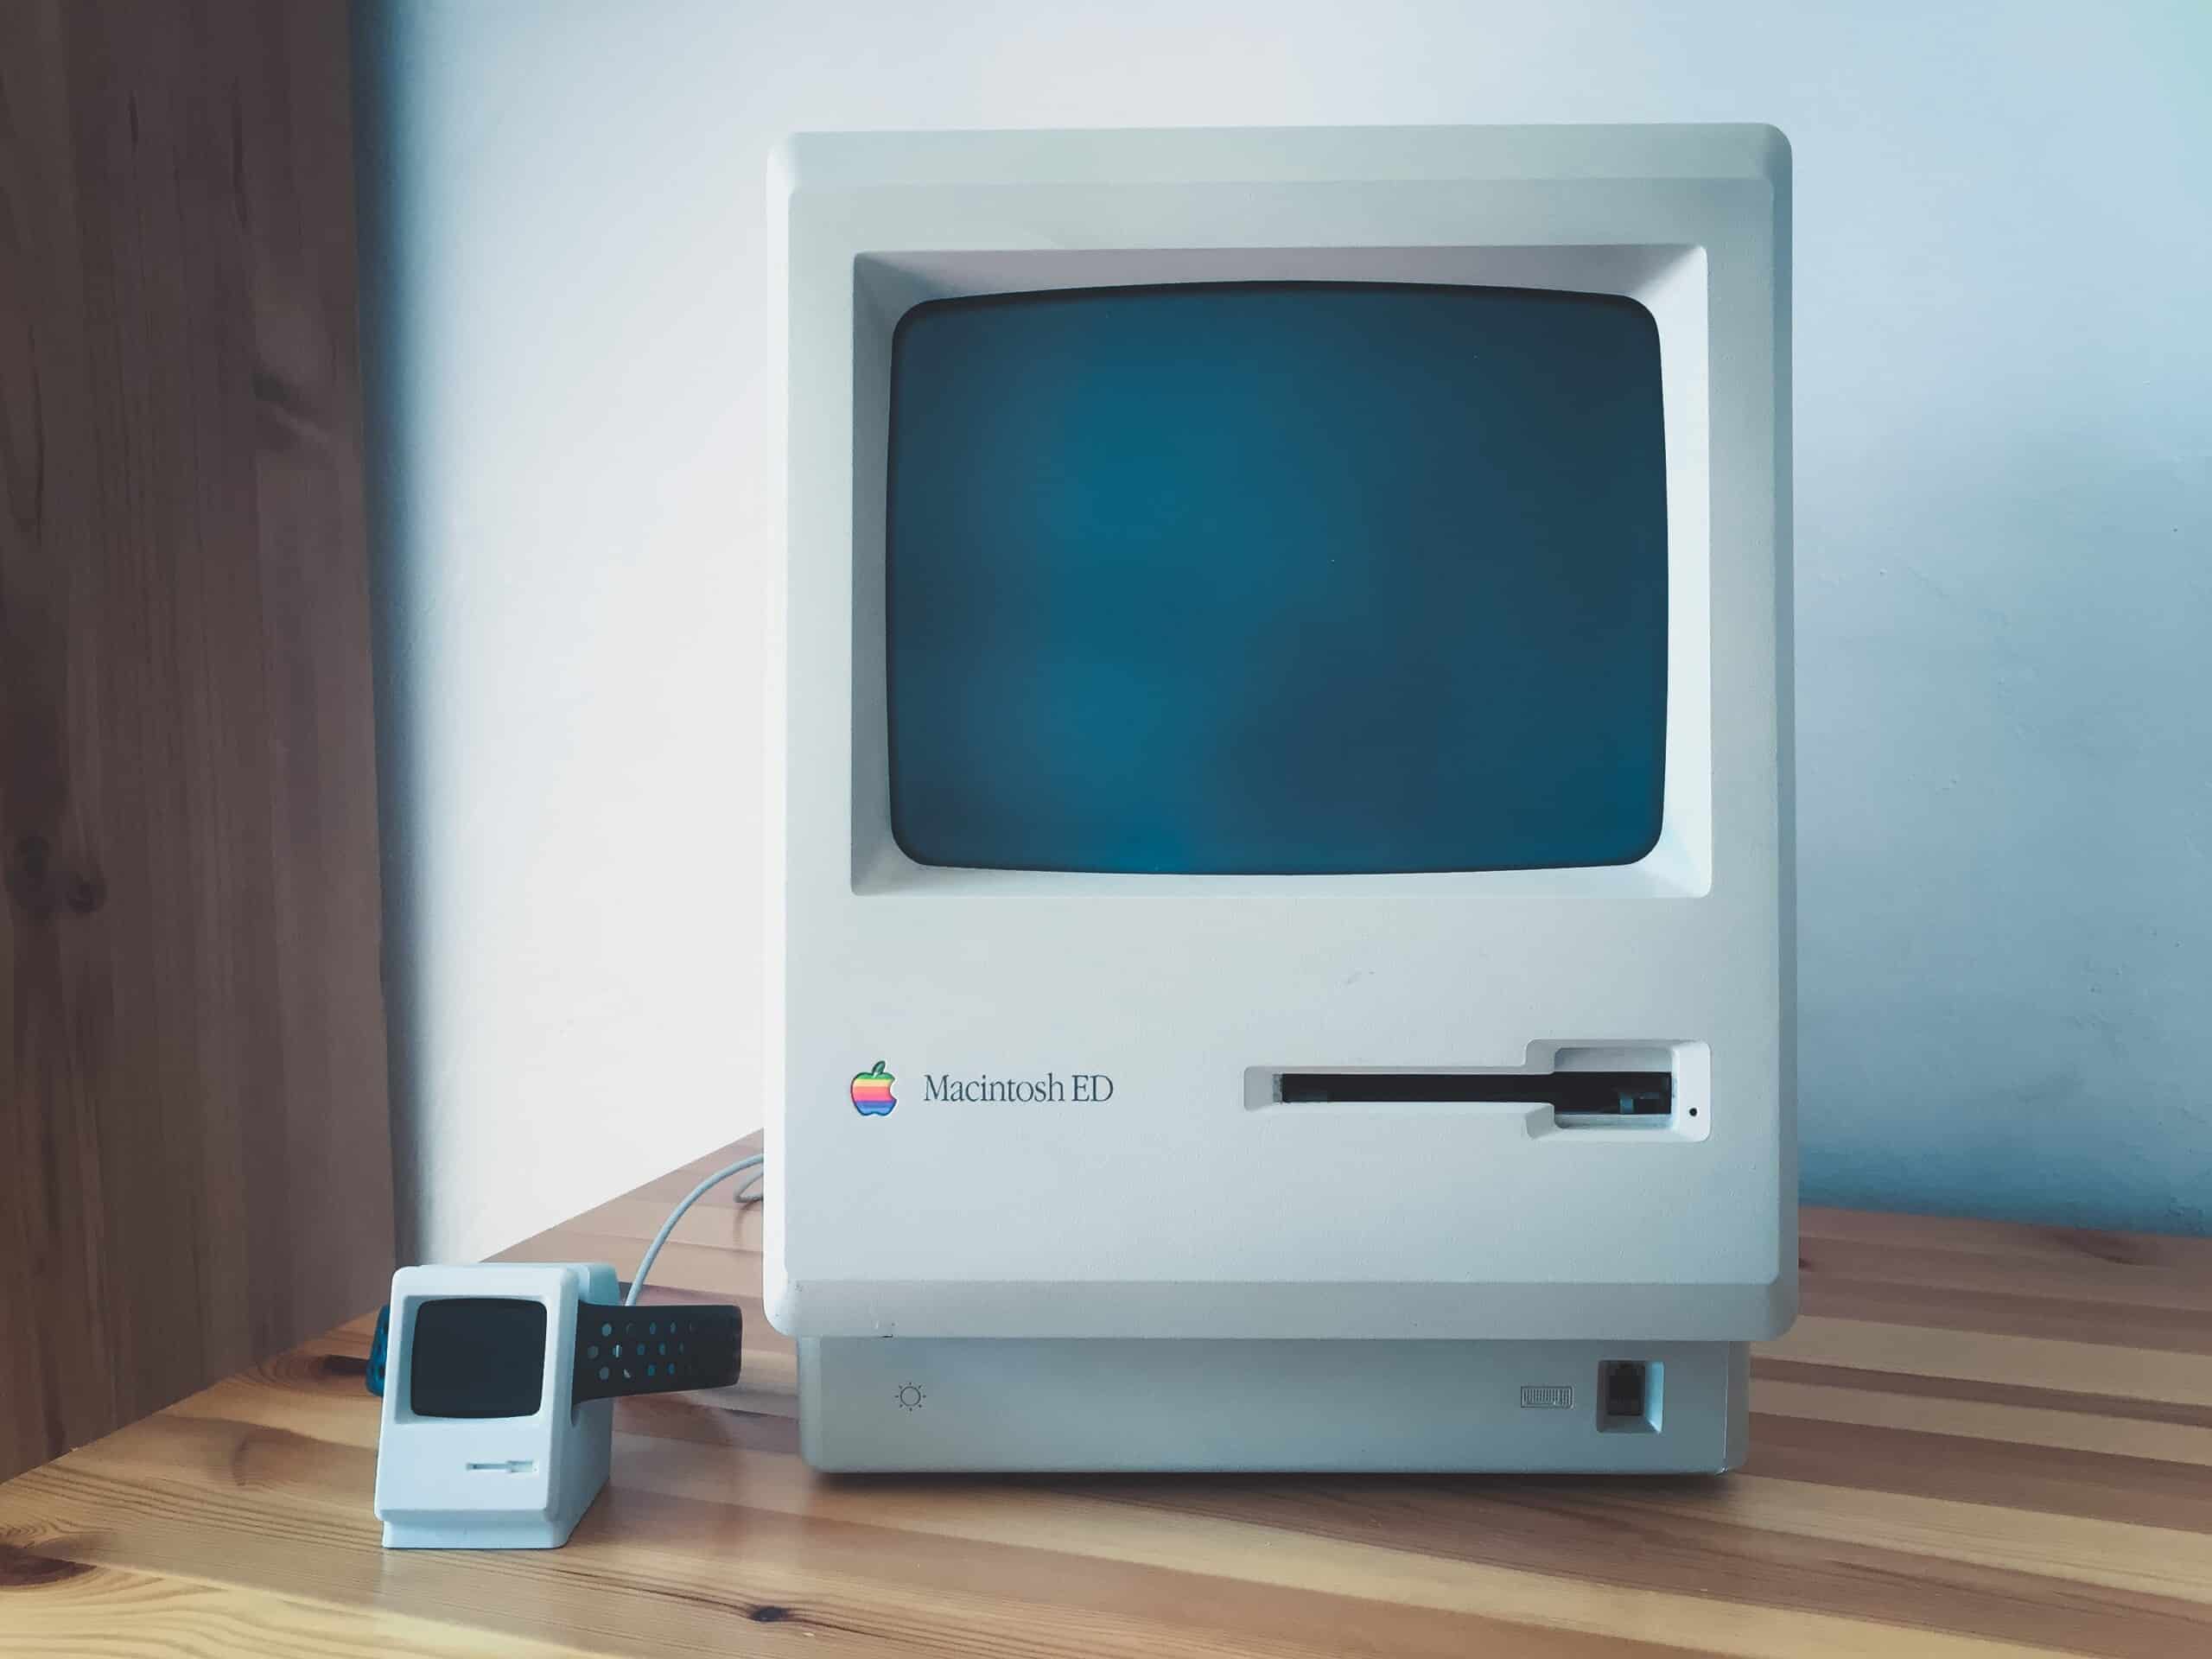 An innovative Apple Macintosh computer sitting on a wooden table.